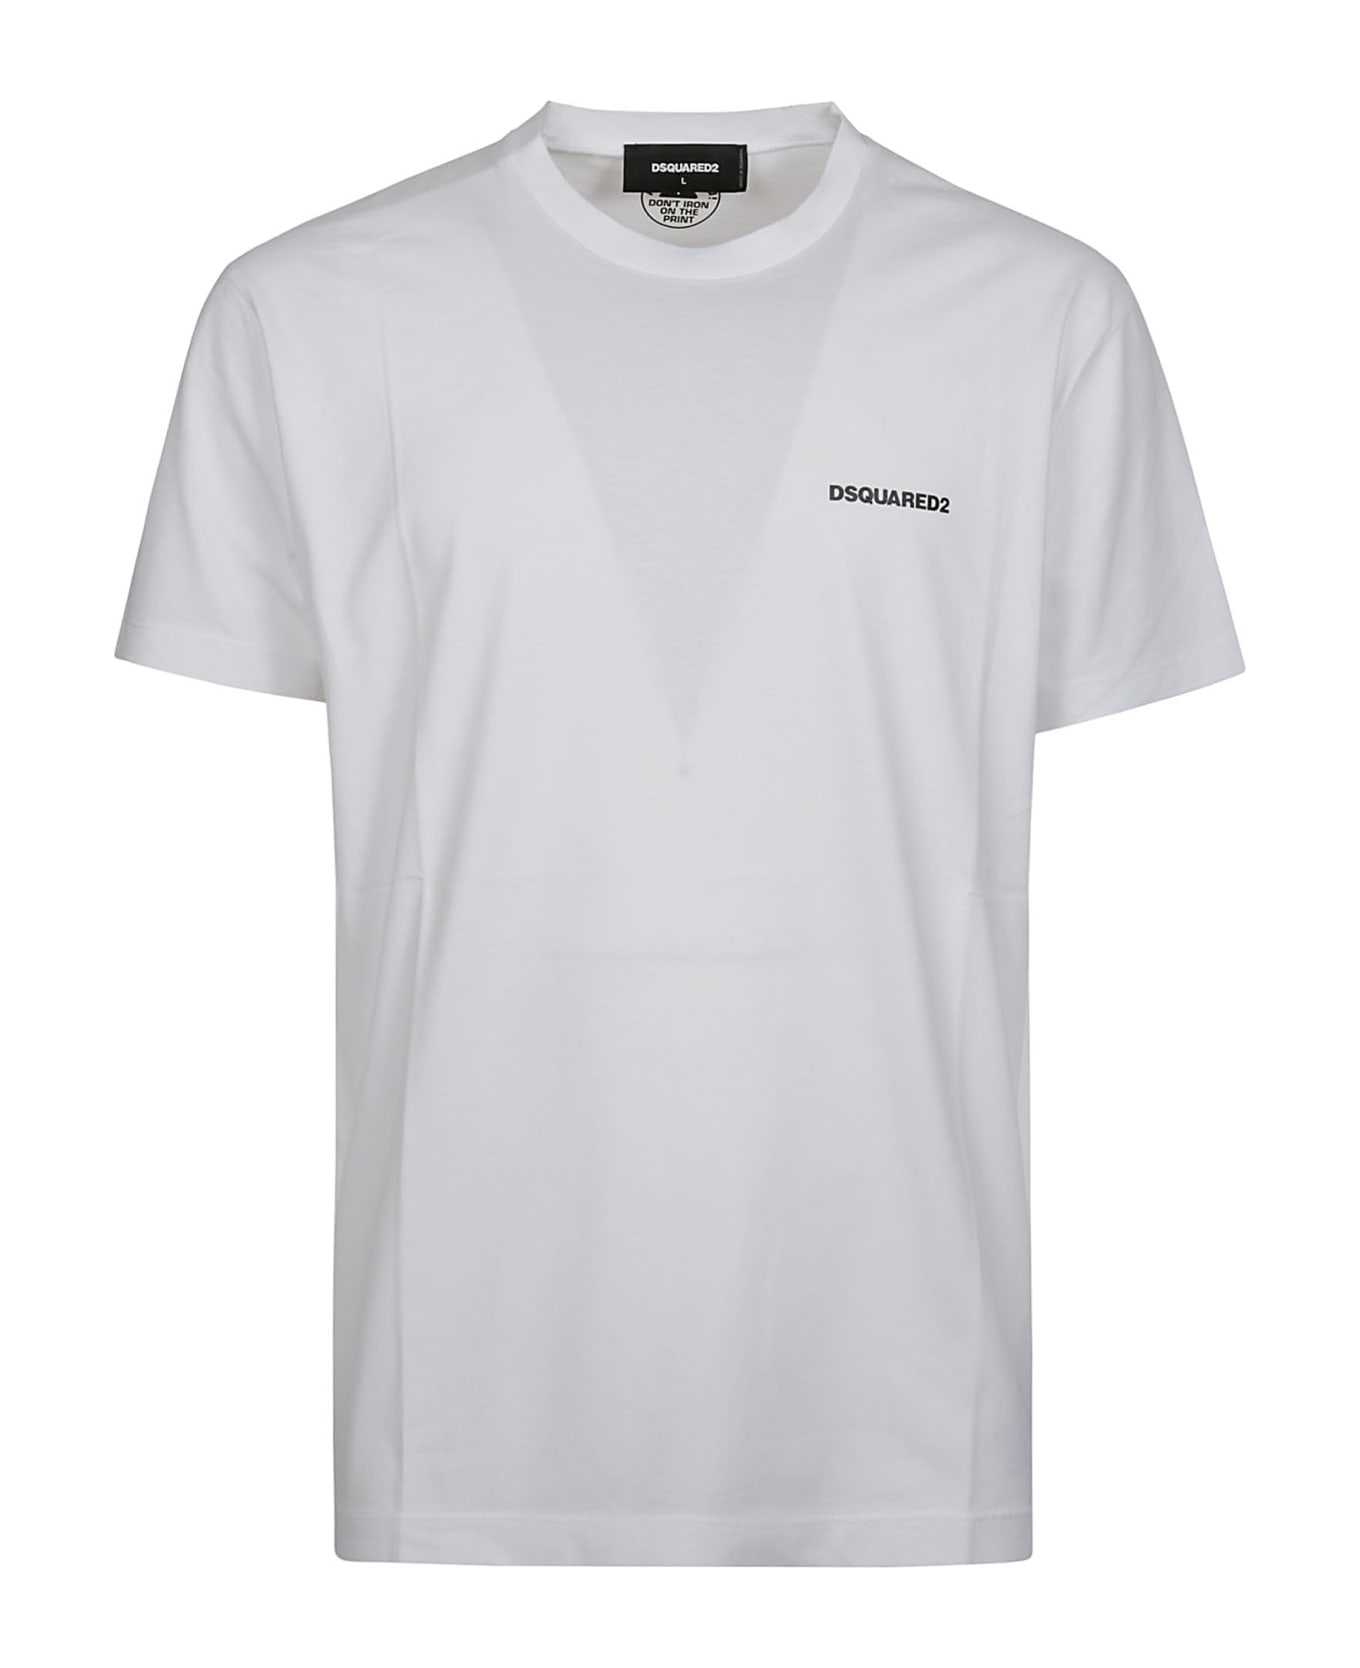 Dsquared2 Cool Fit T-shirt - White